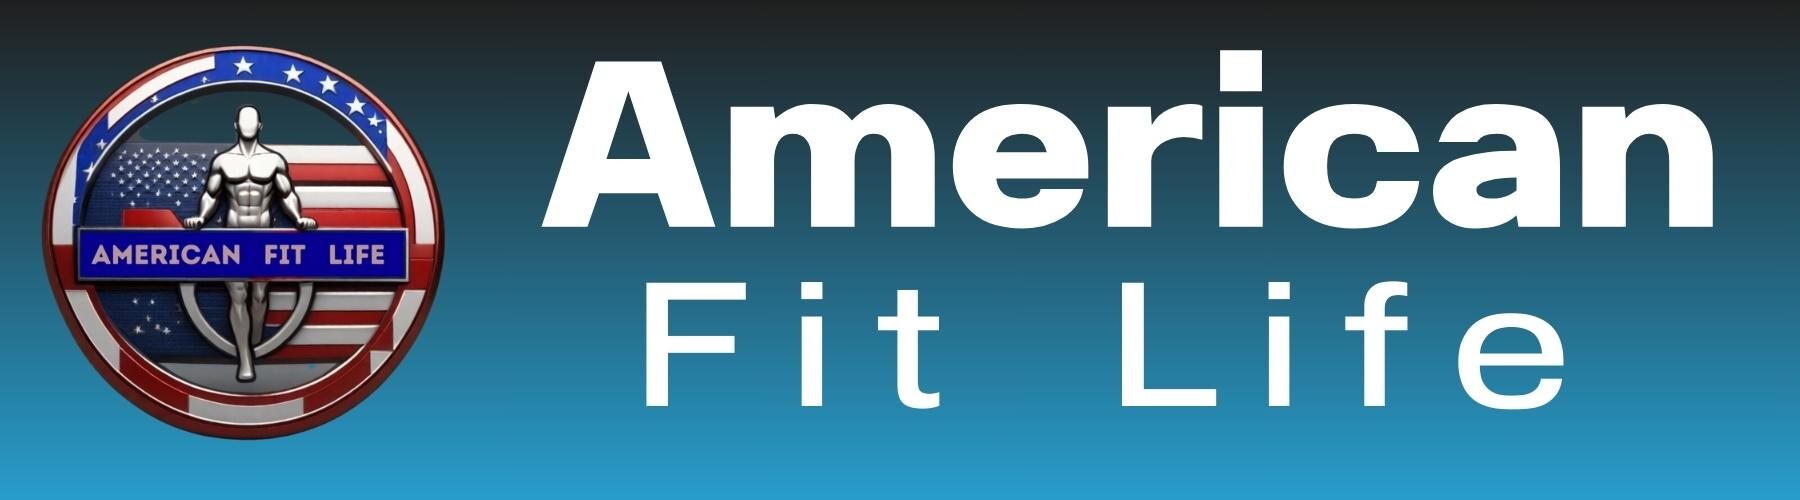 american fit life